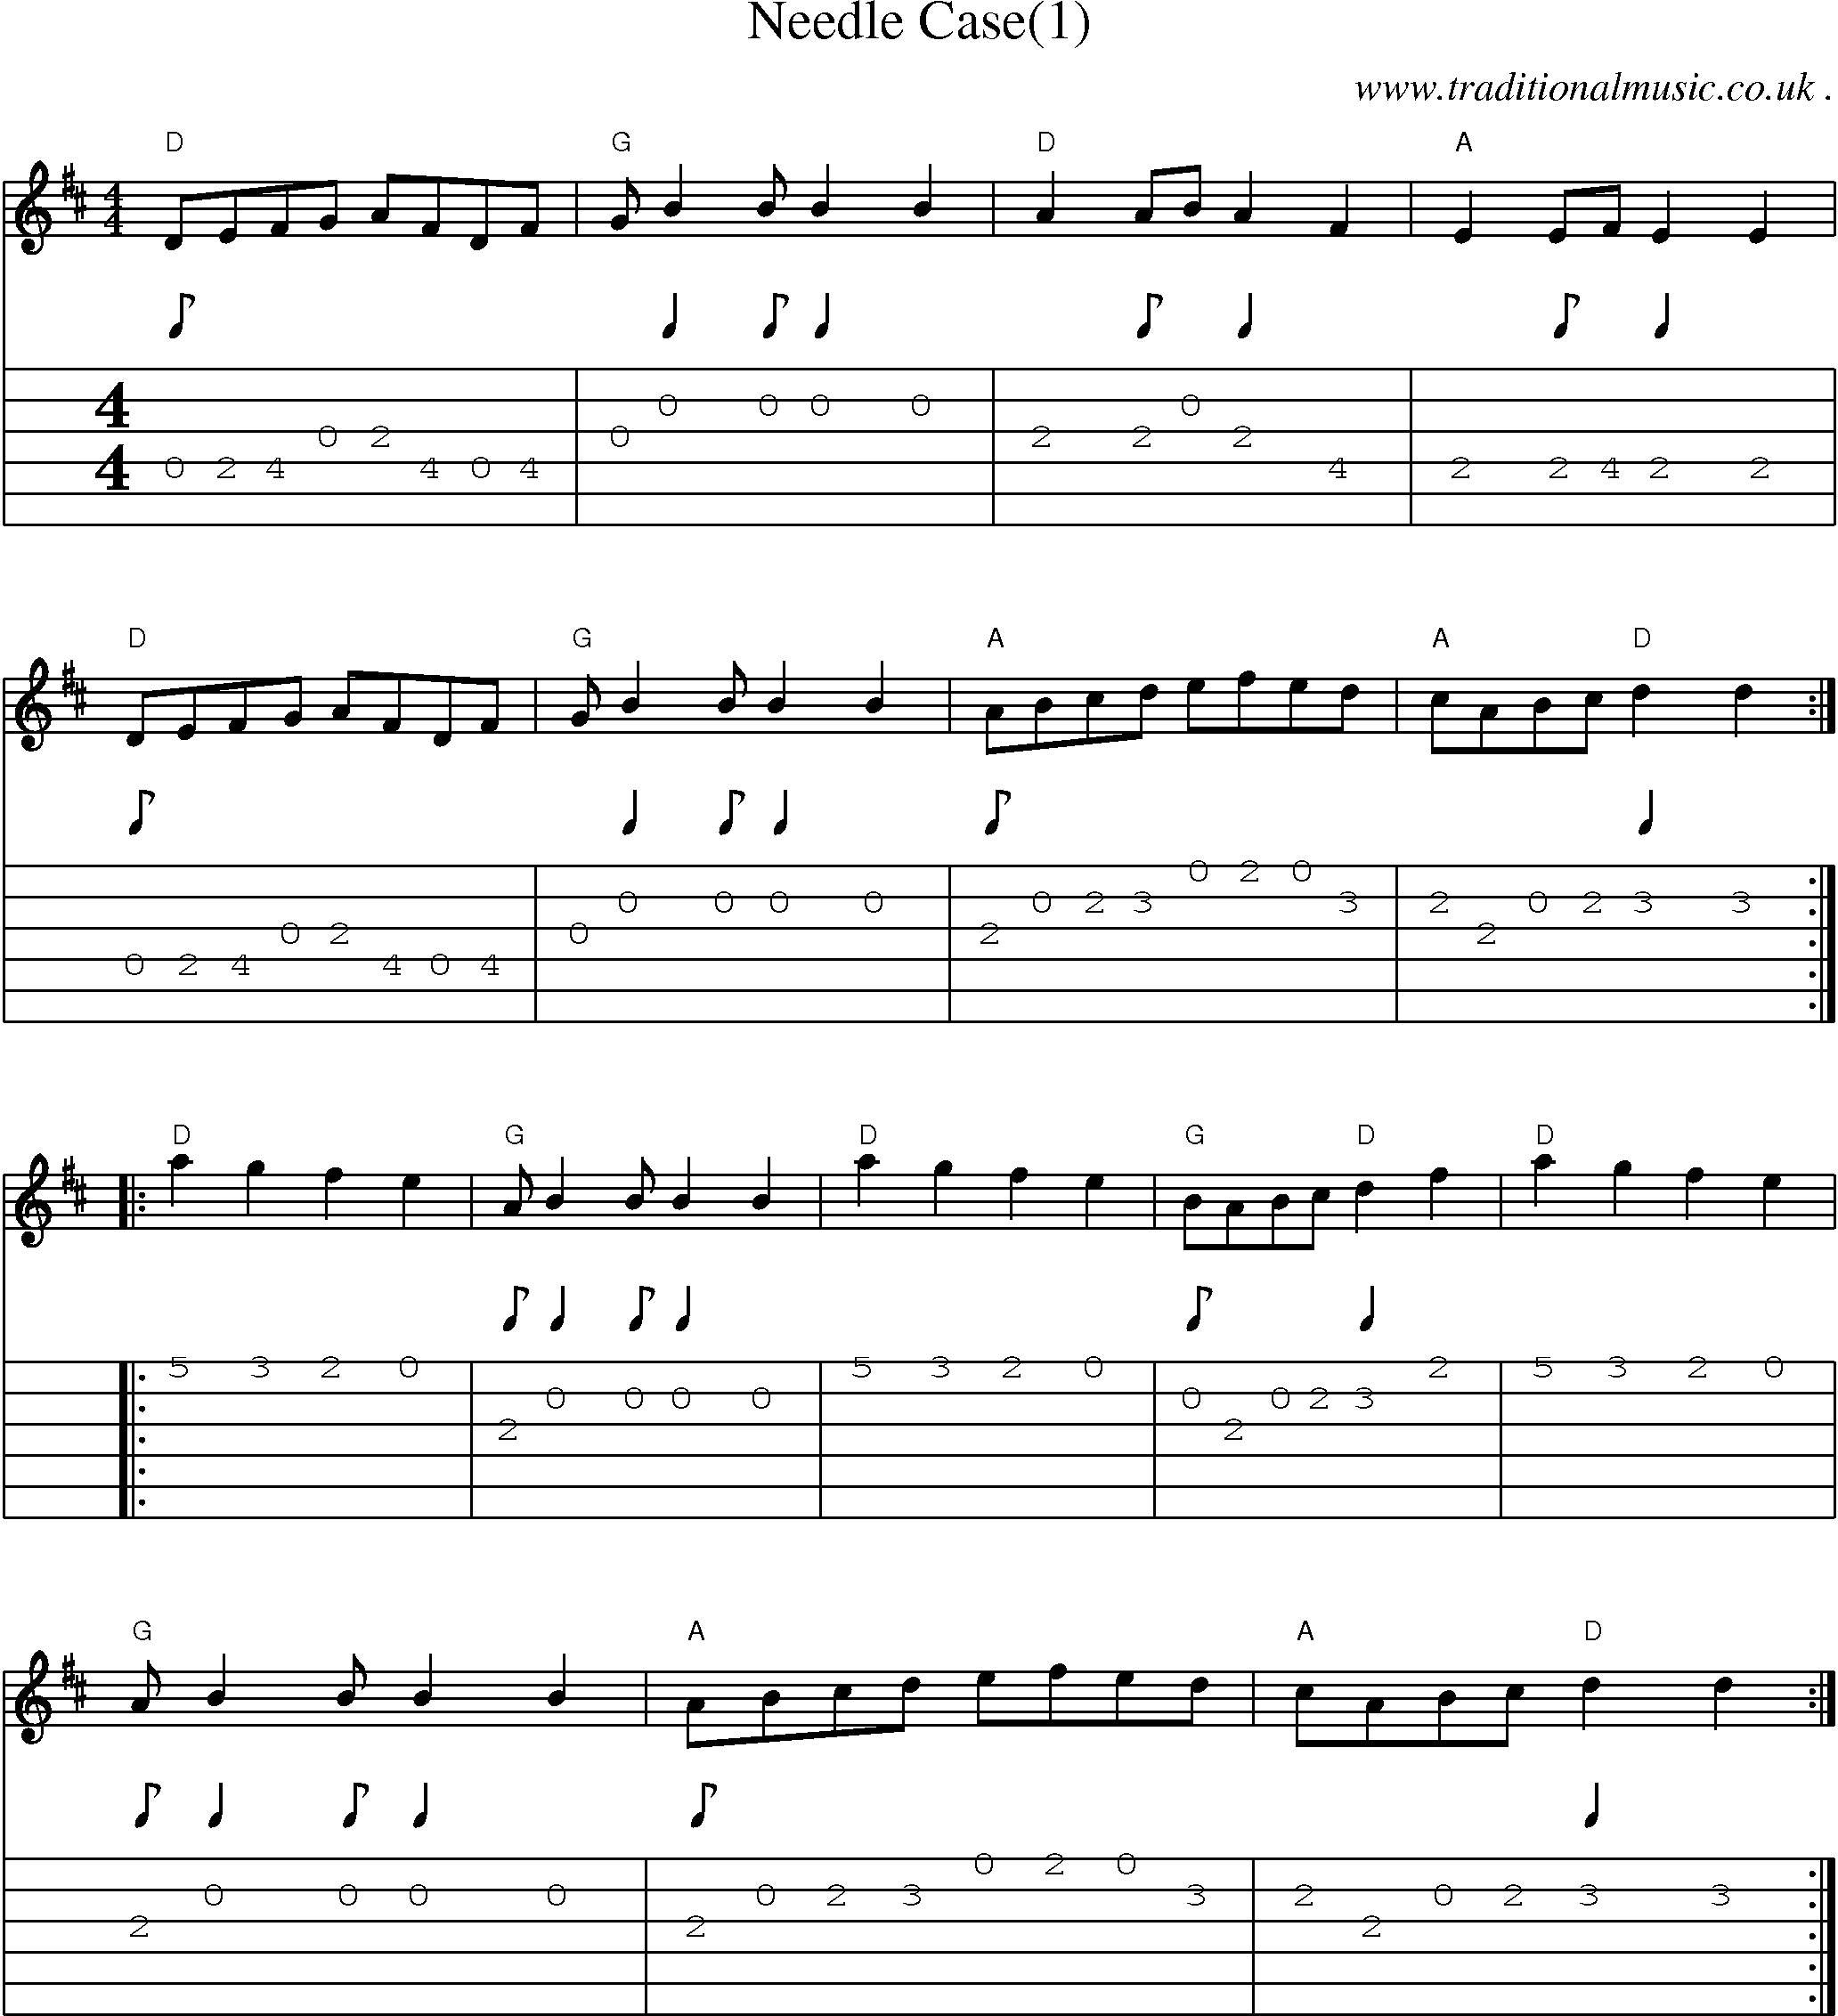 Music Score and Guitar Tabs for Needle Case(1)